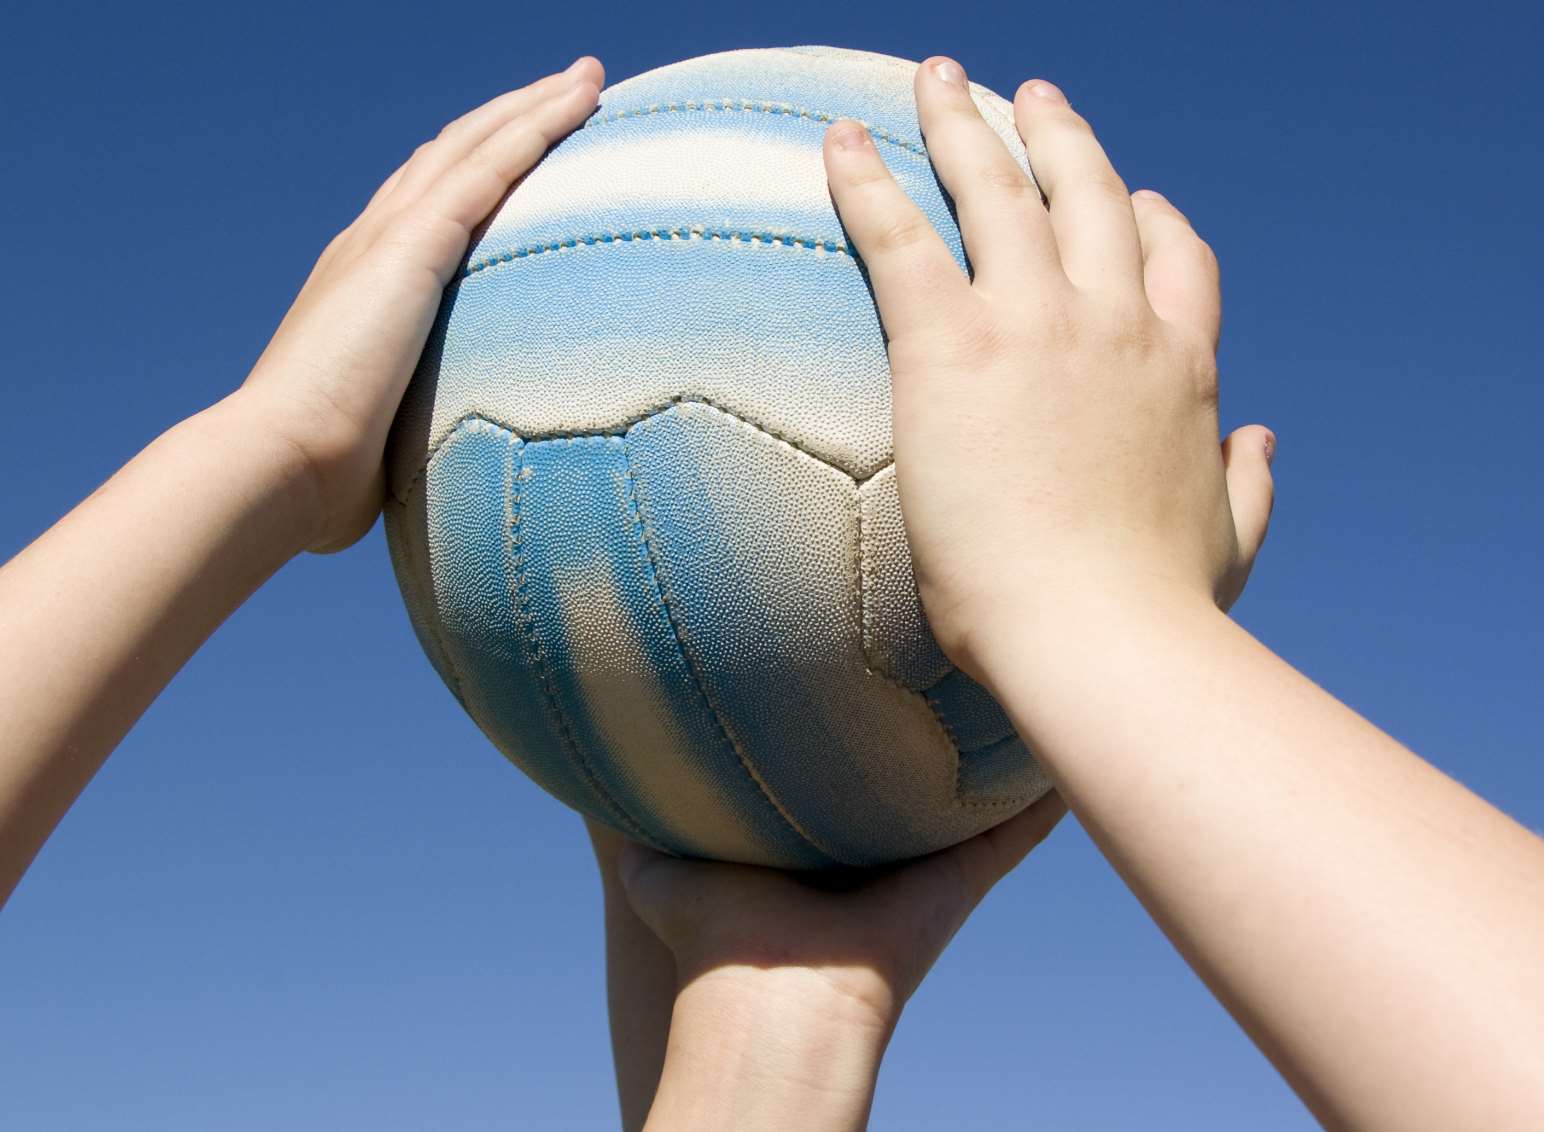 Netball is turning me into a feisty aunt. Picture: Thinkstock